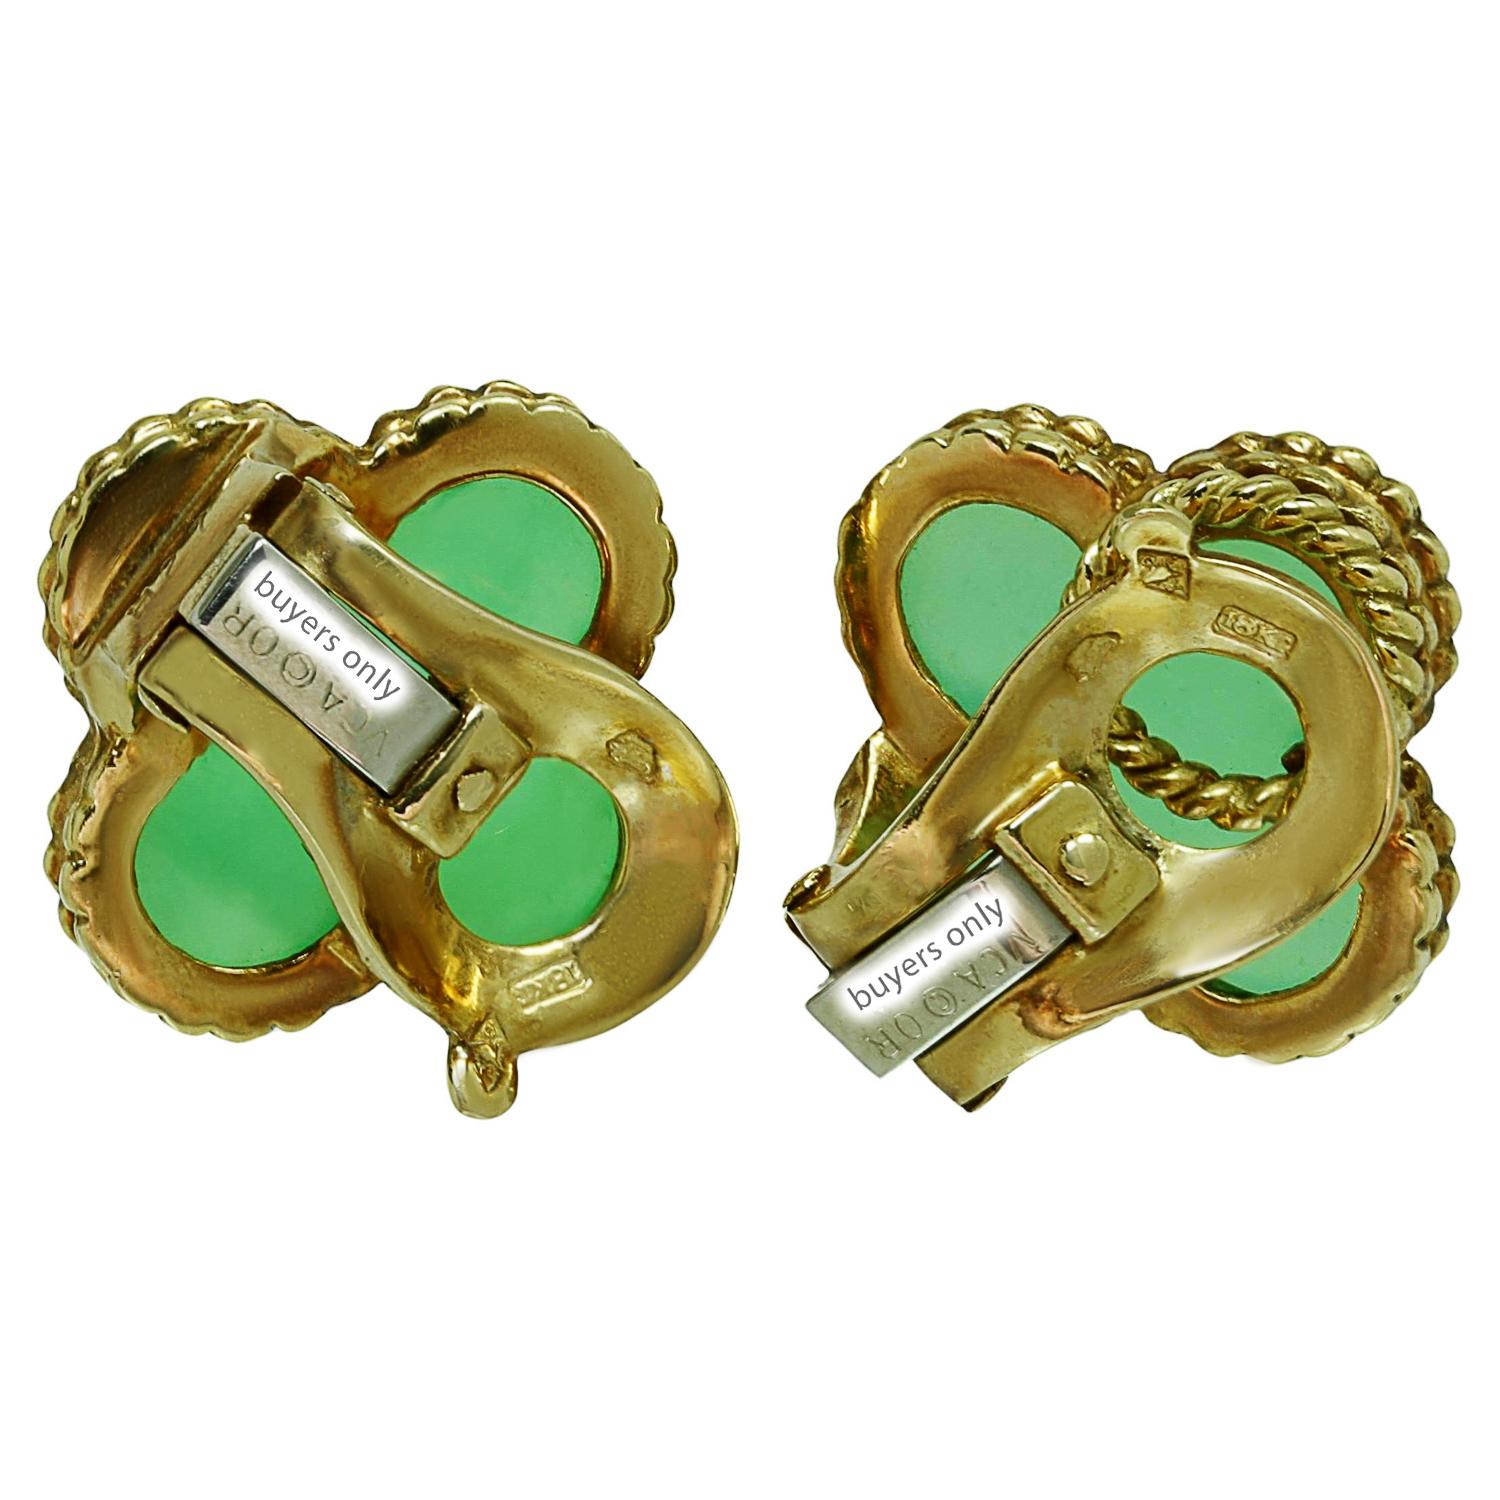 These stunning Van Cleef & Arpels clip-on earrings from the classic Vintage Alhambra collection are crafted in 18k yellow gold and feature a beaded lucky clover design set with green chrysoprase. Made in France circa 1980s. Posts for pierced ears